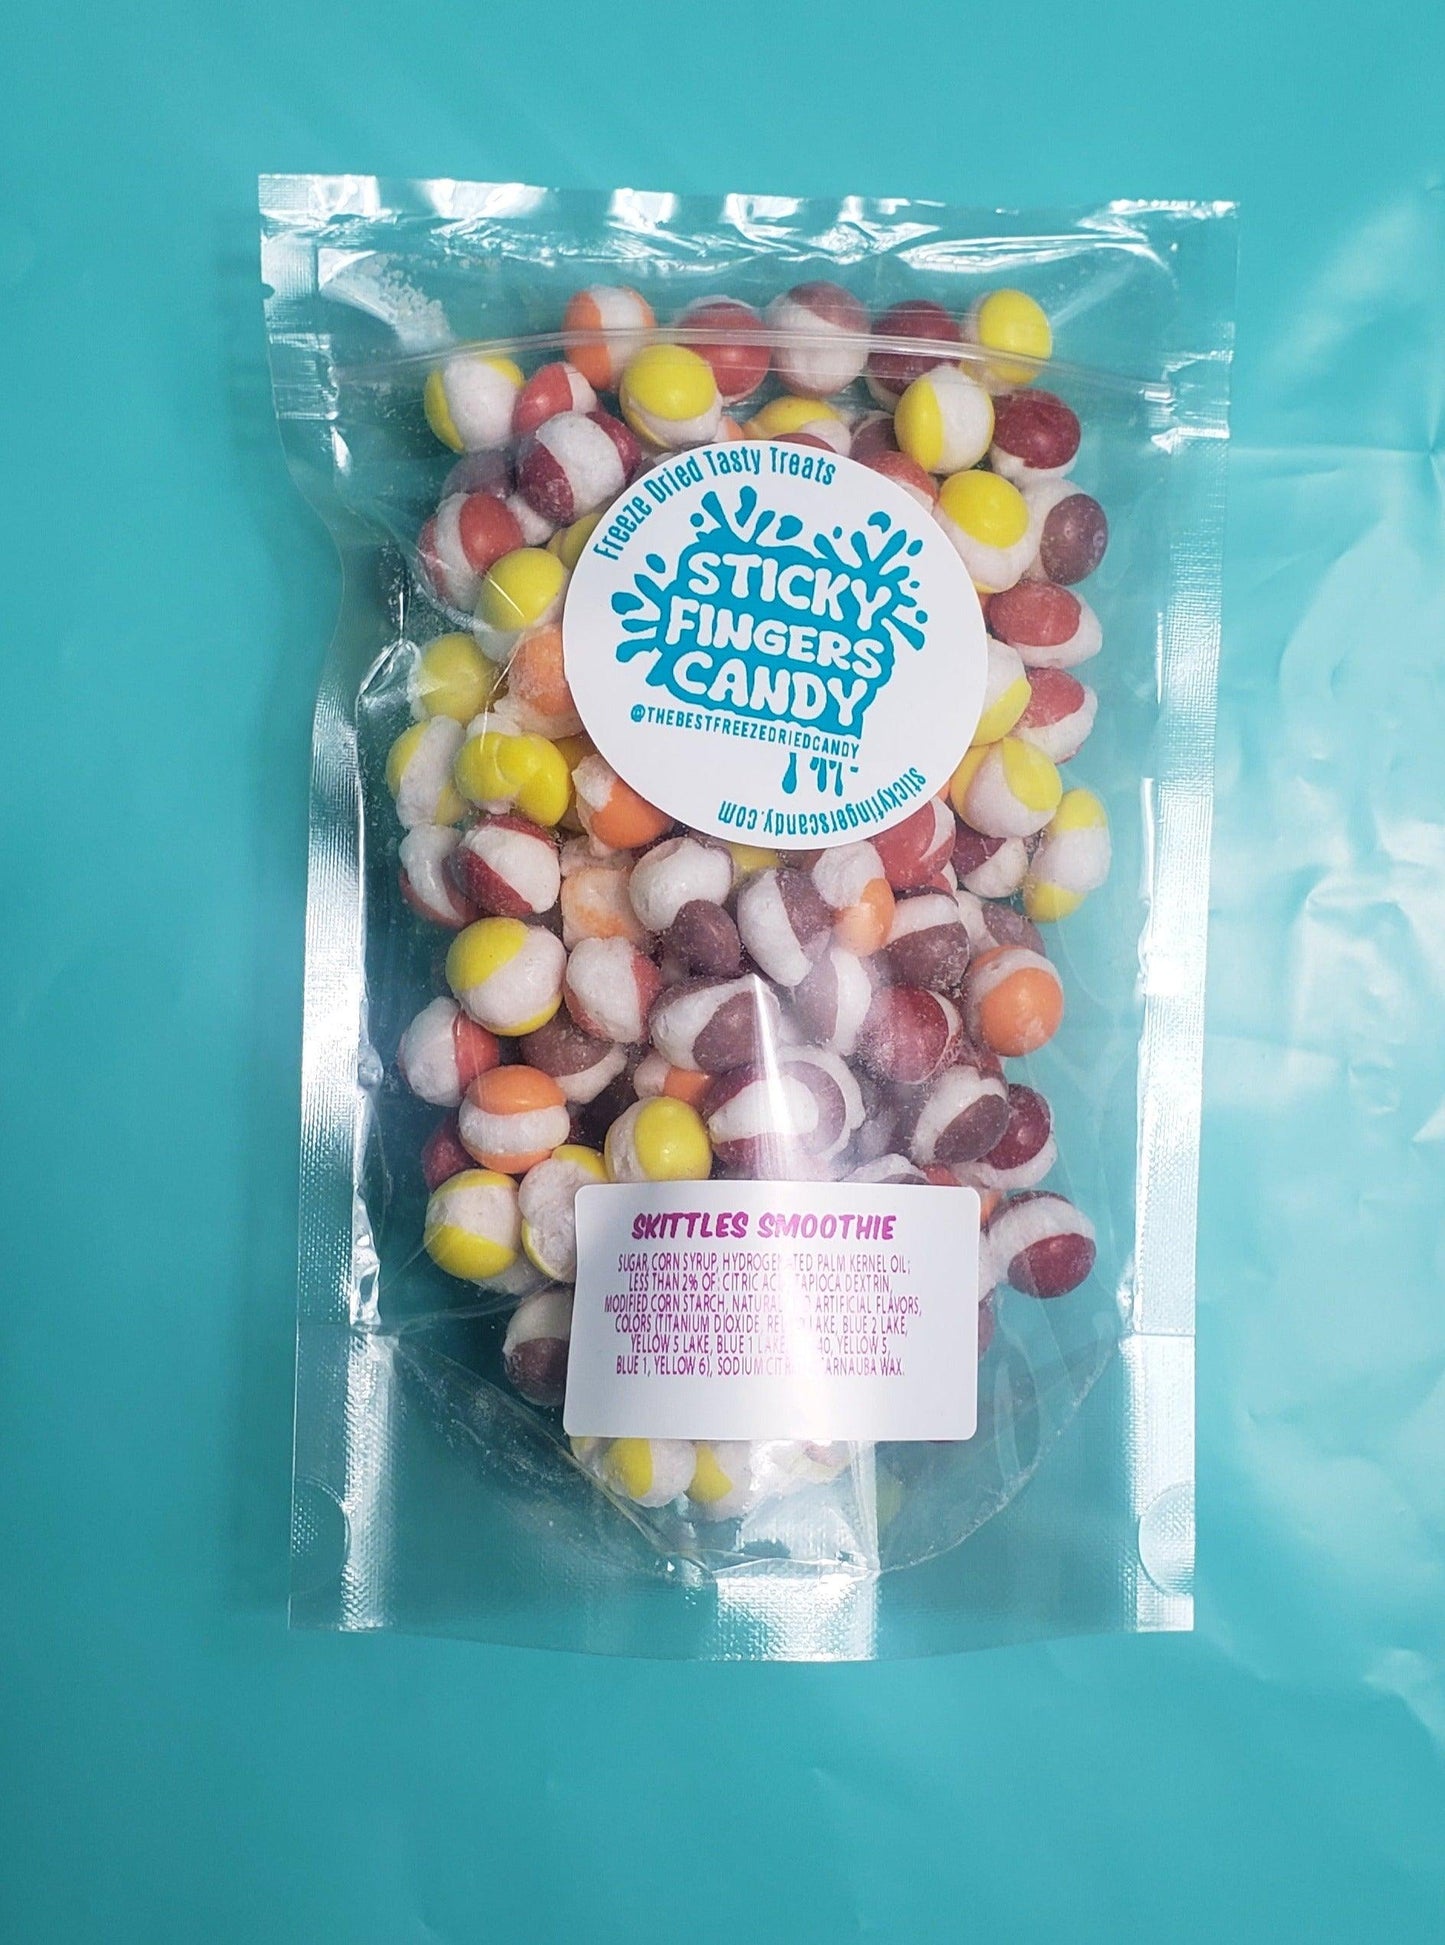 Smoothie Freeze Dried Skittles Candy - Sticky Fingers Candy - Freeze Dried Tasty Treats